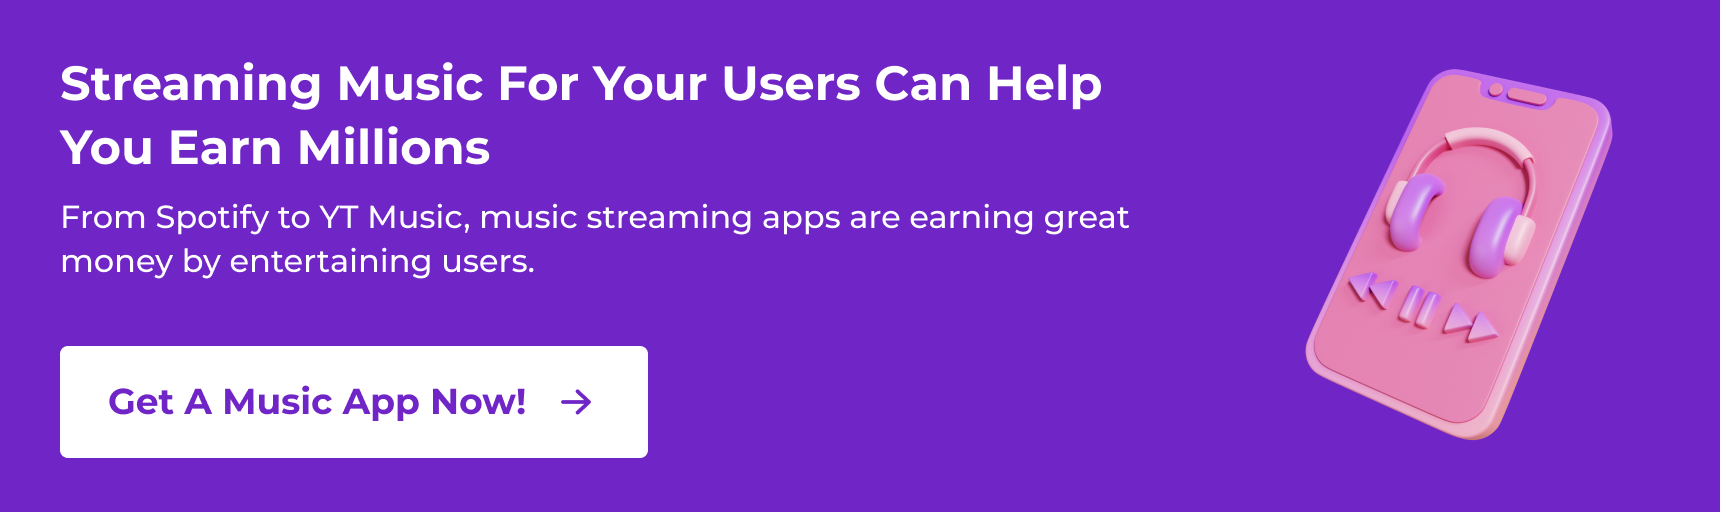 From Spotify to YT Music, music streaming apps are earning great money by entertaining users